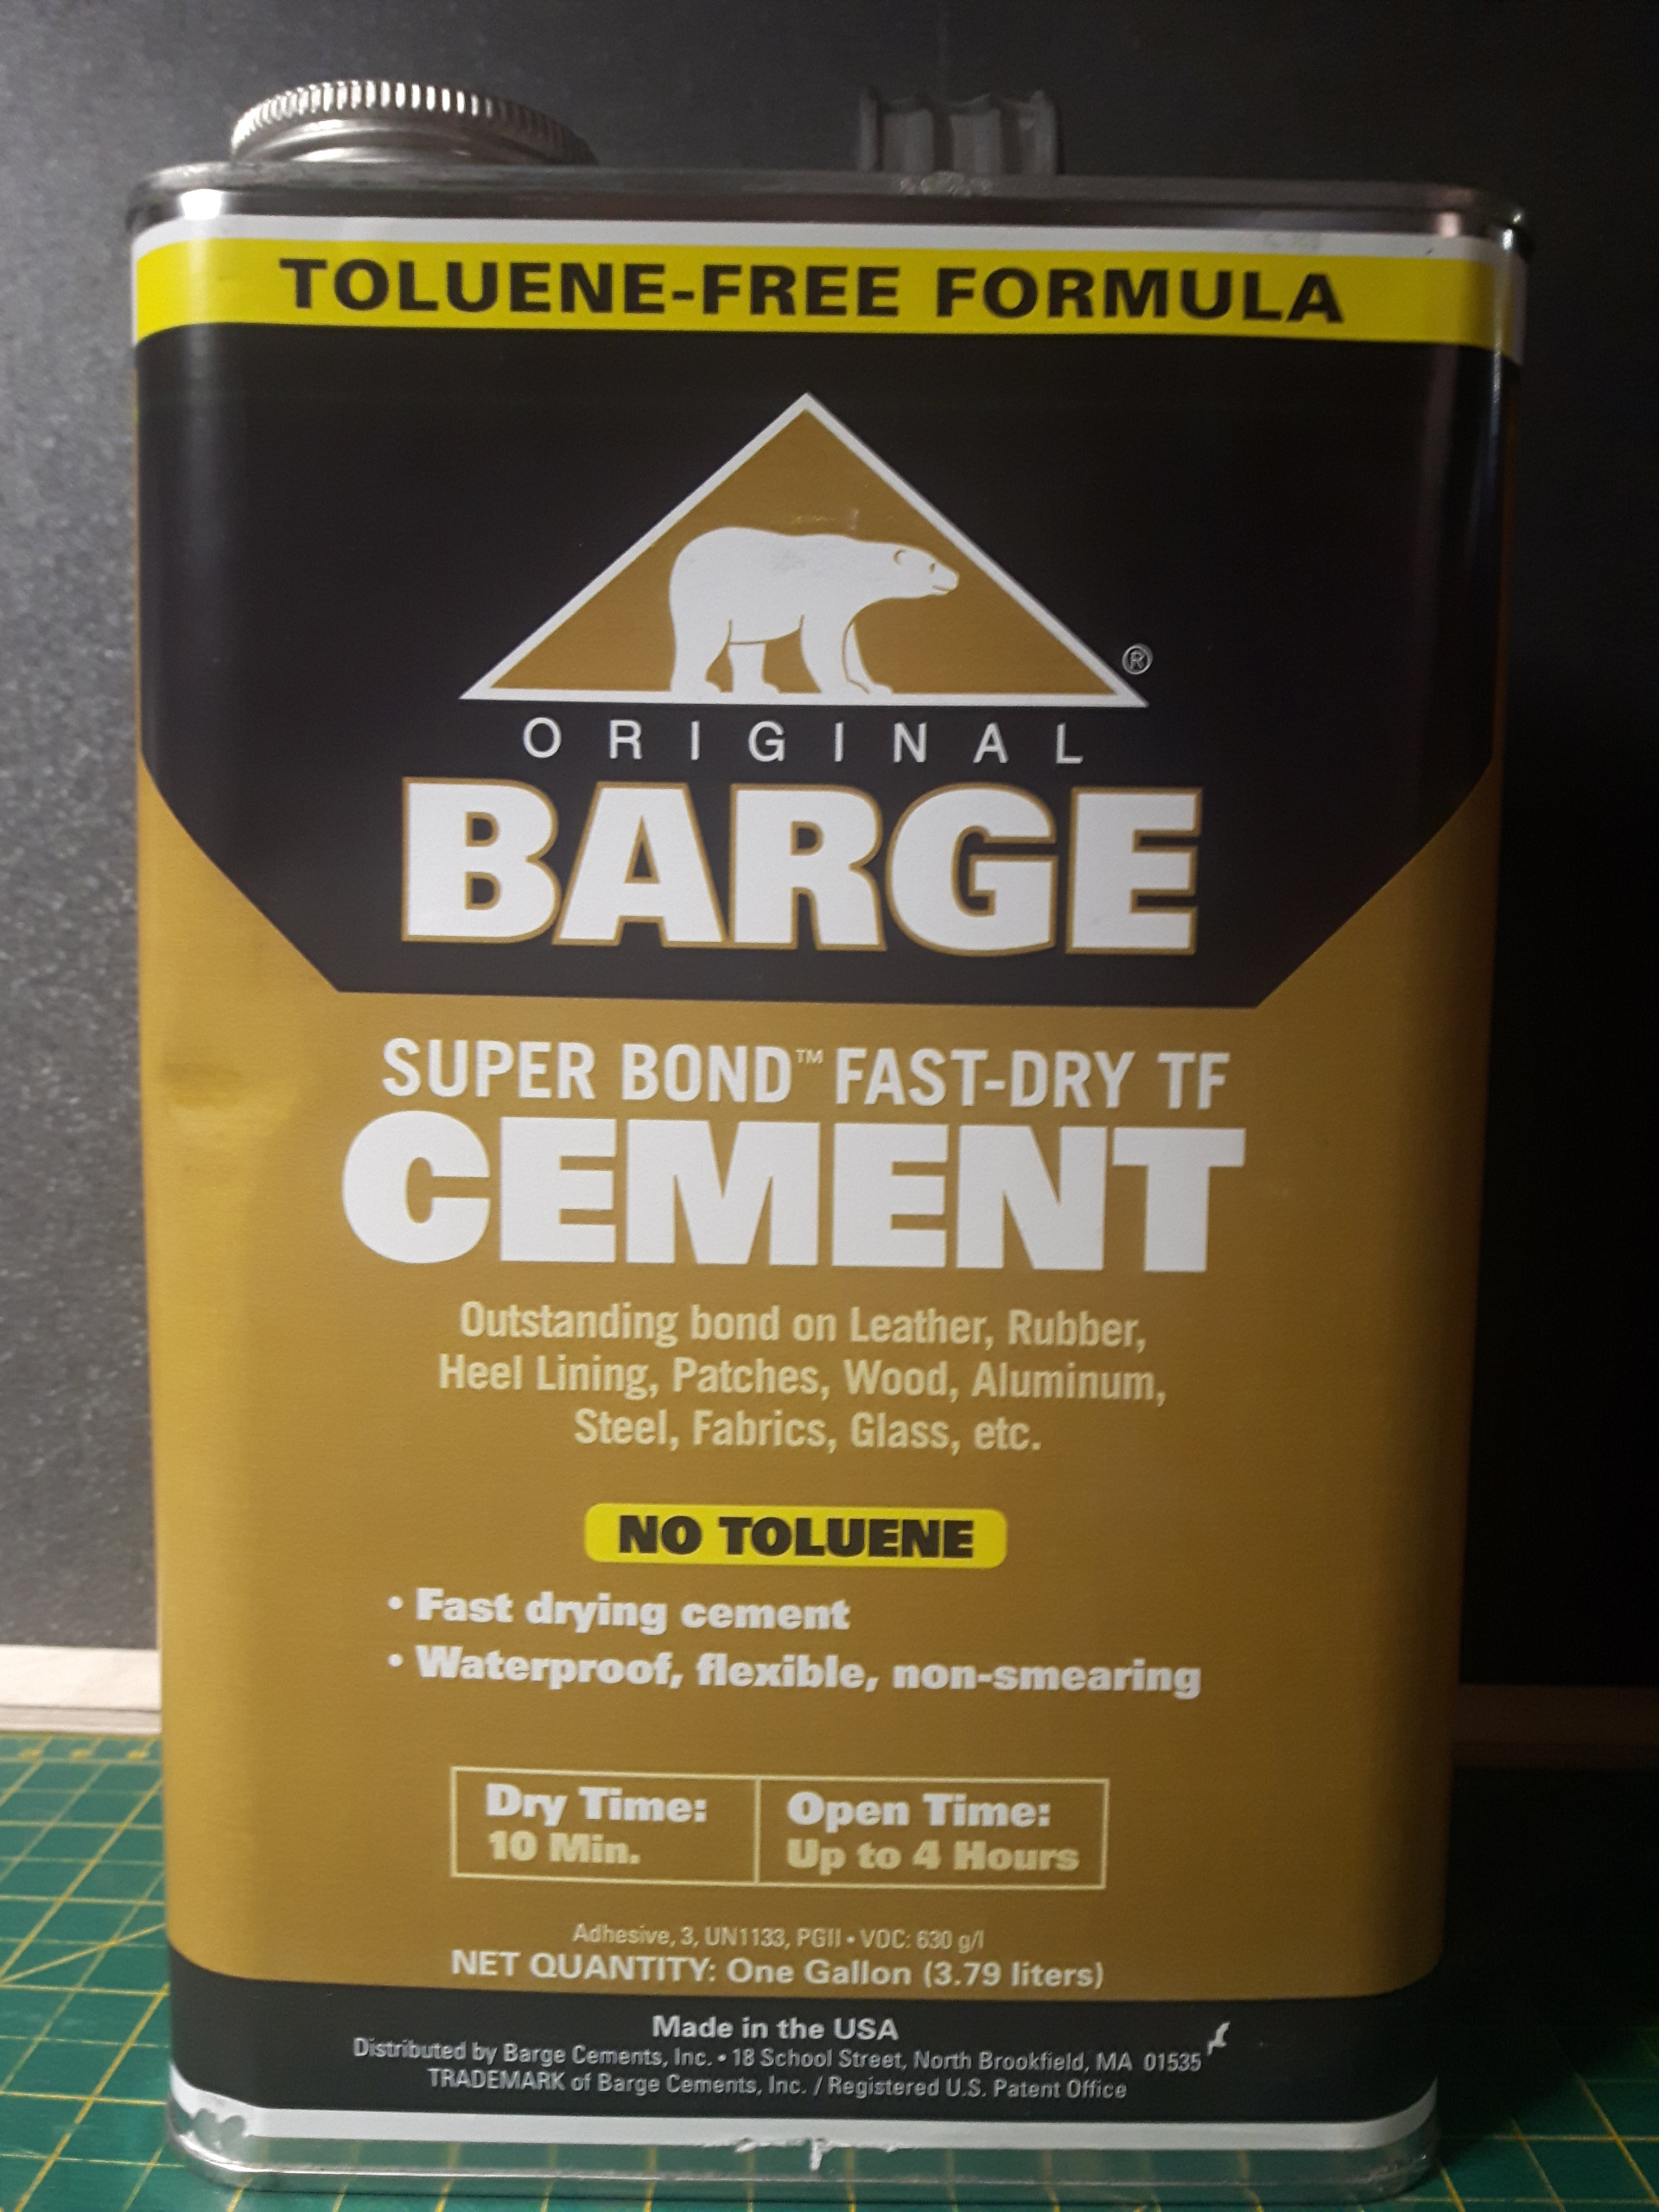 Barge Cement SuperSpeed - 1 Gallon Toluene Free